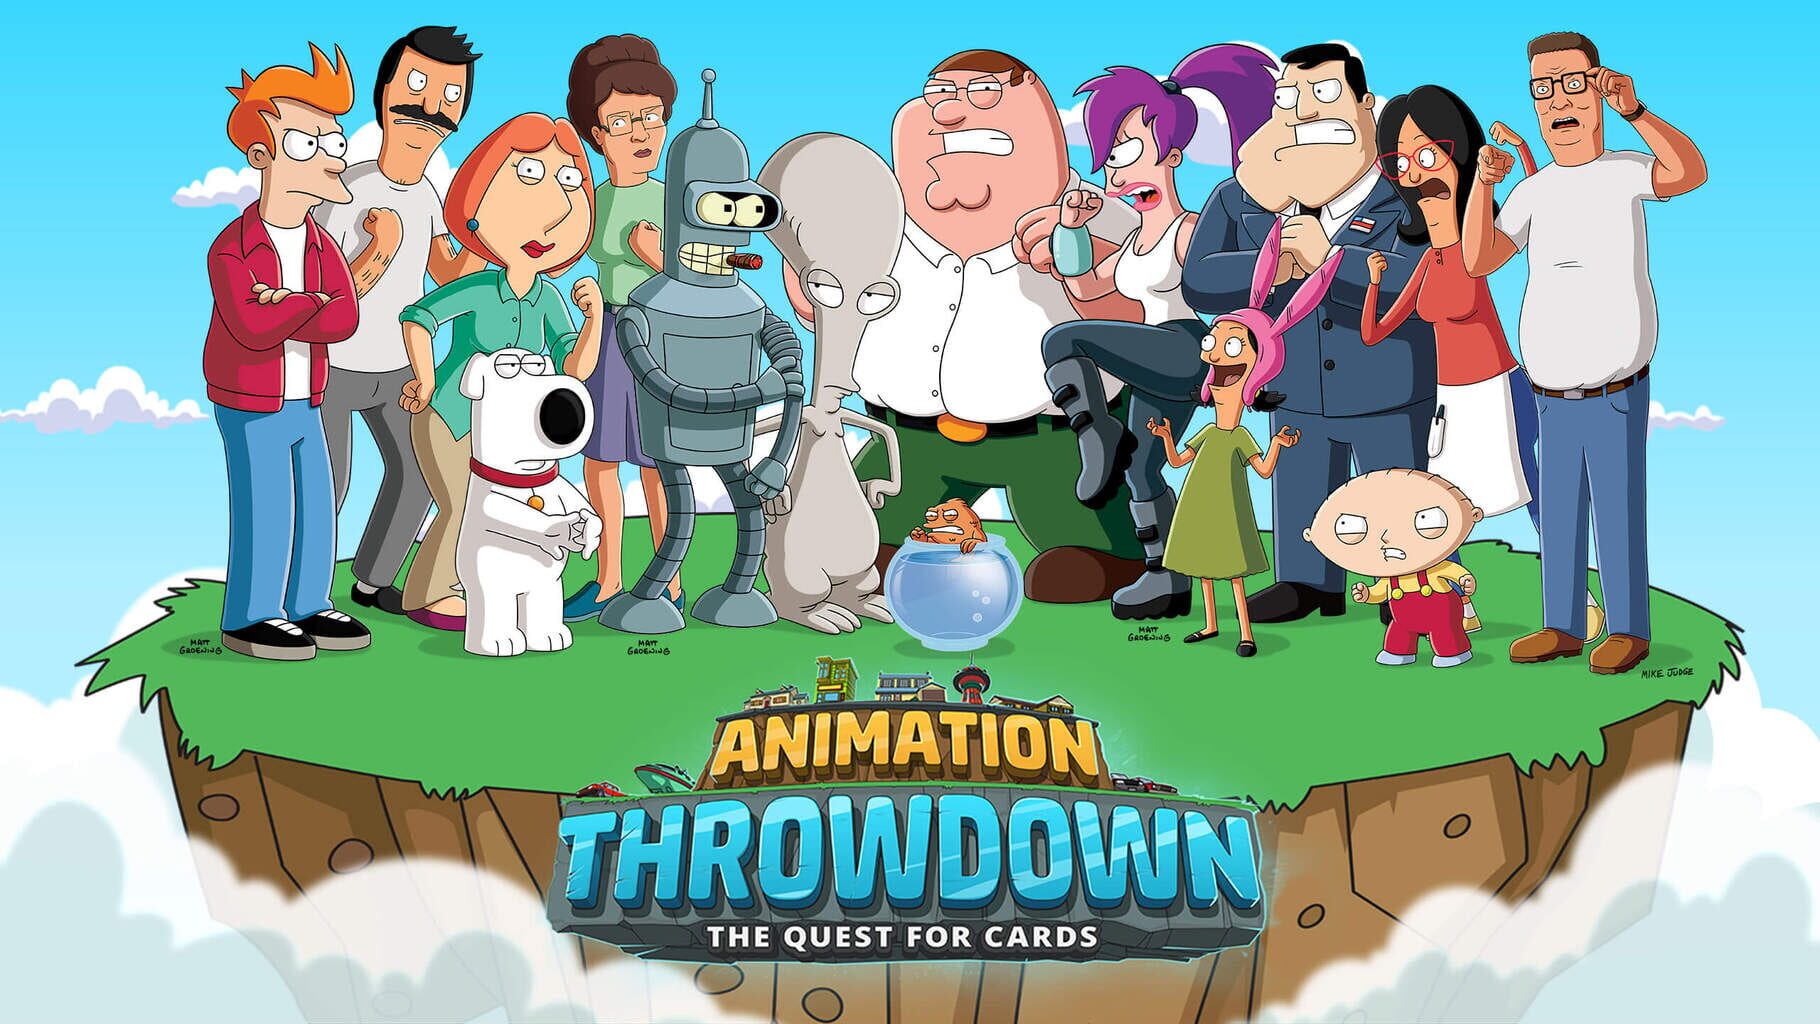 Arte - Animation Throwdown: The Quest for Cards